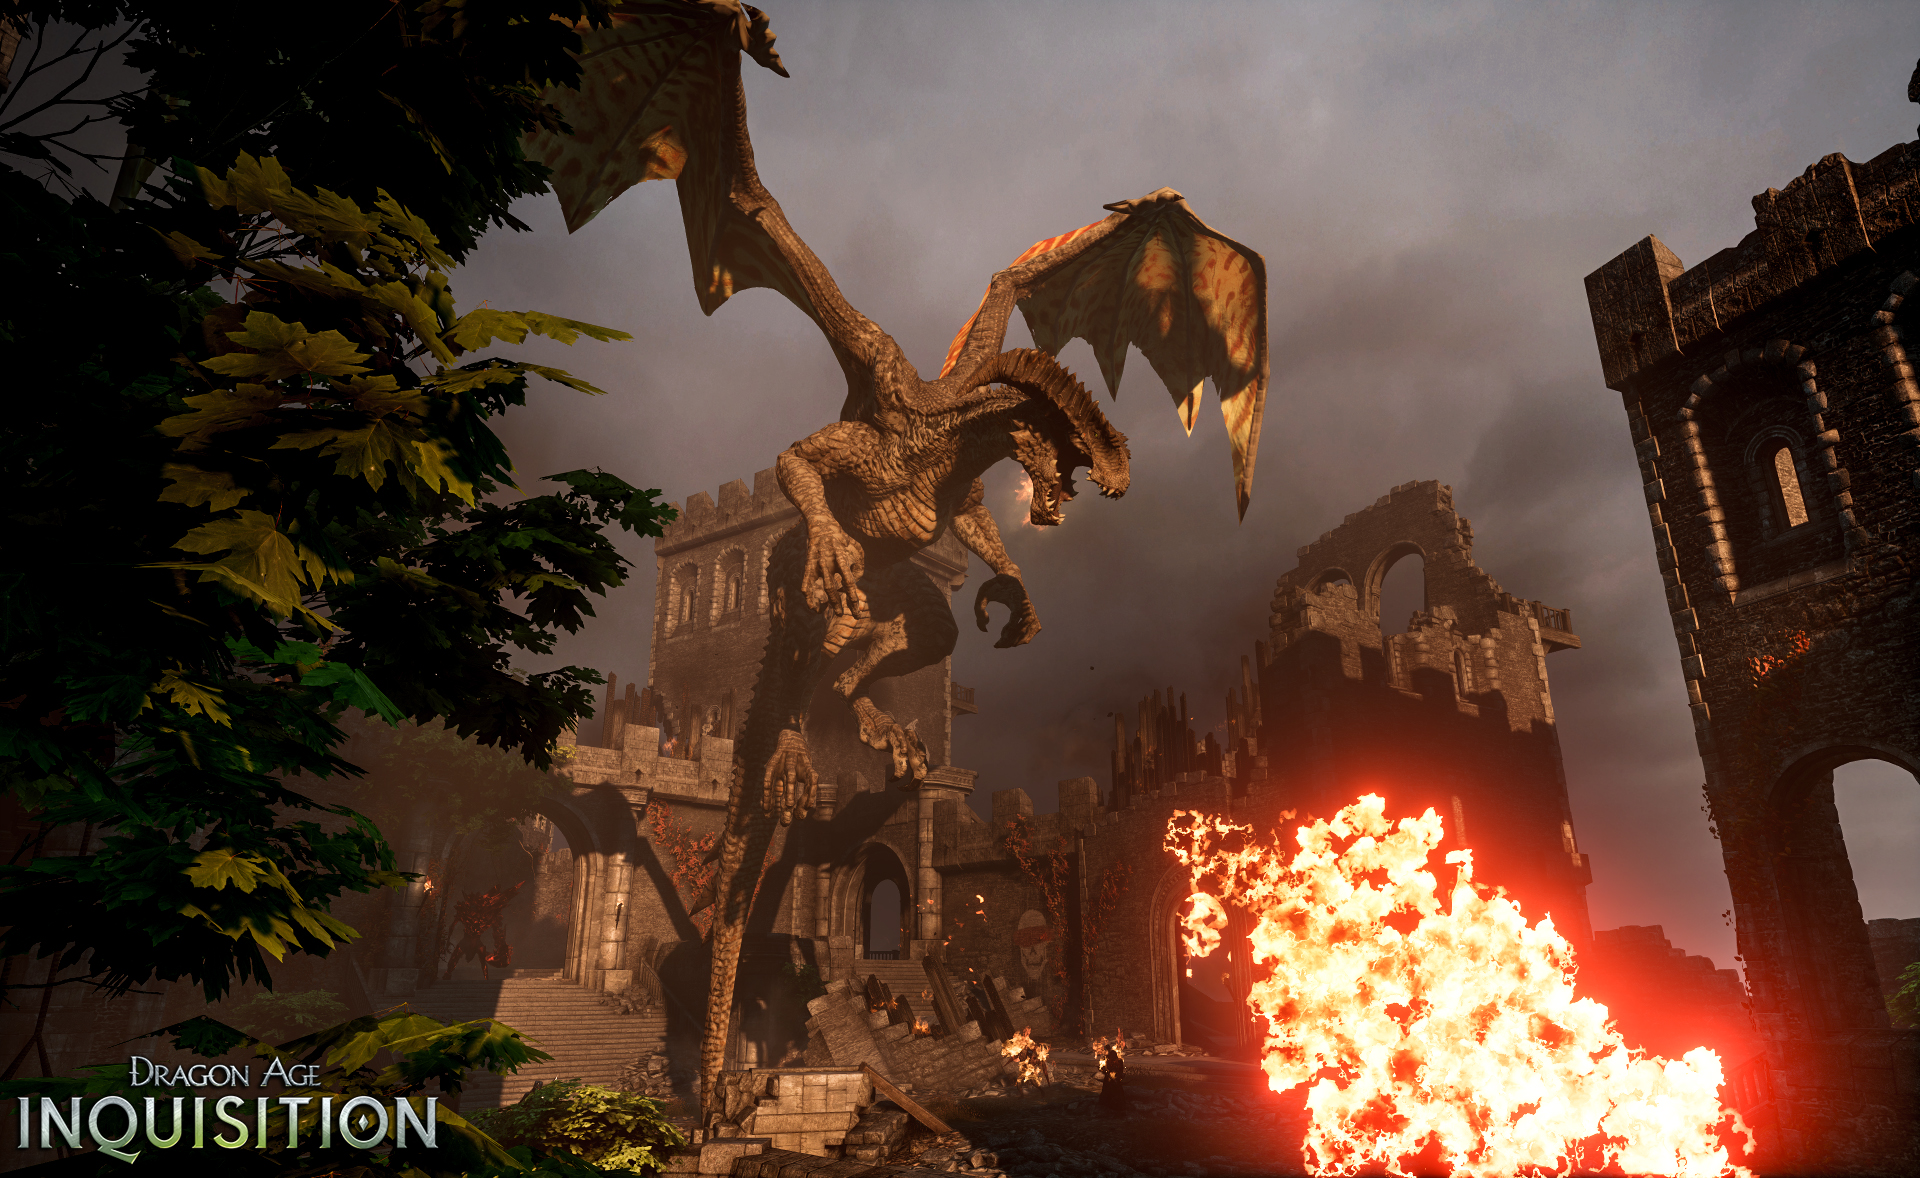 Dragon Age: Inquisition HD wallpapers, Desktop wallpaper - most viewed